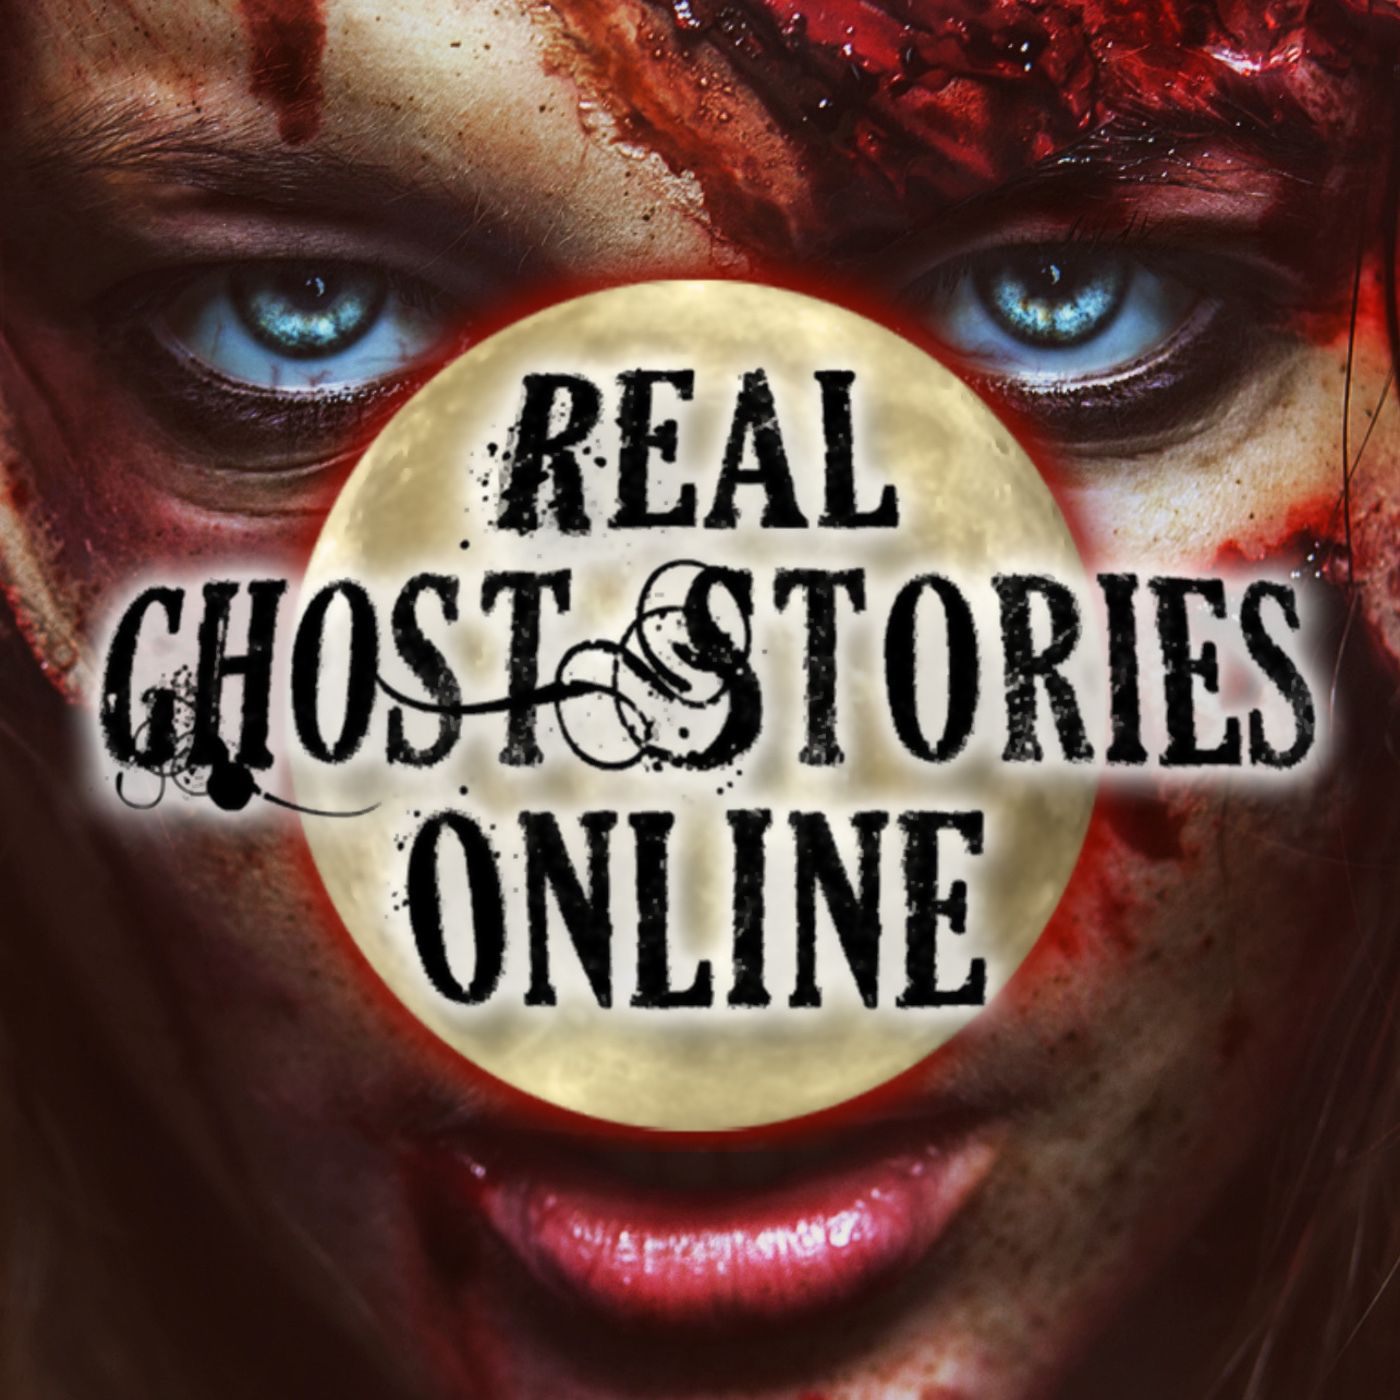 Was He Attacked? | Real Ghost Stories Online